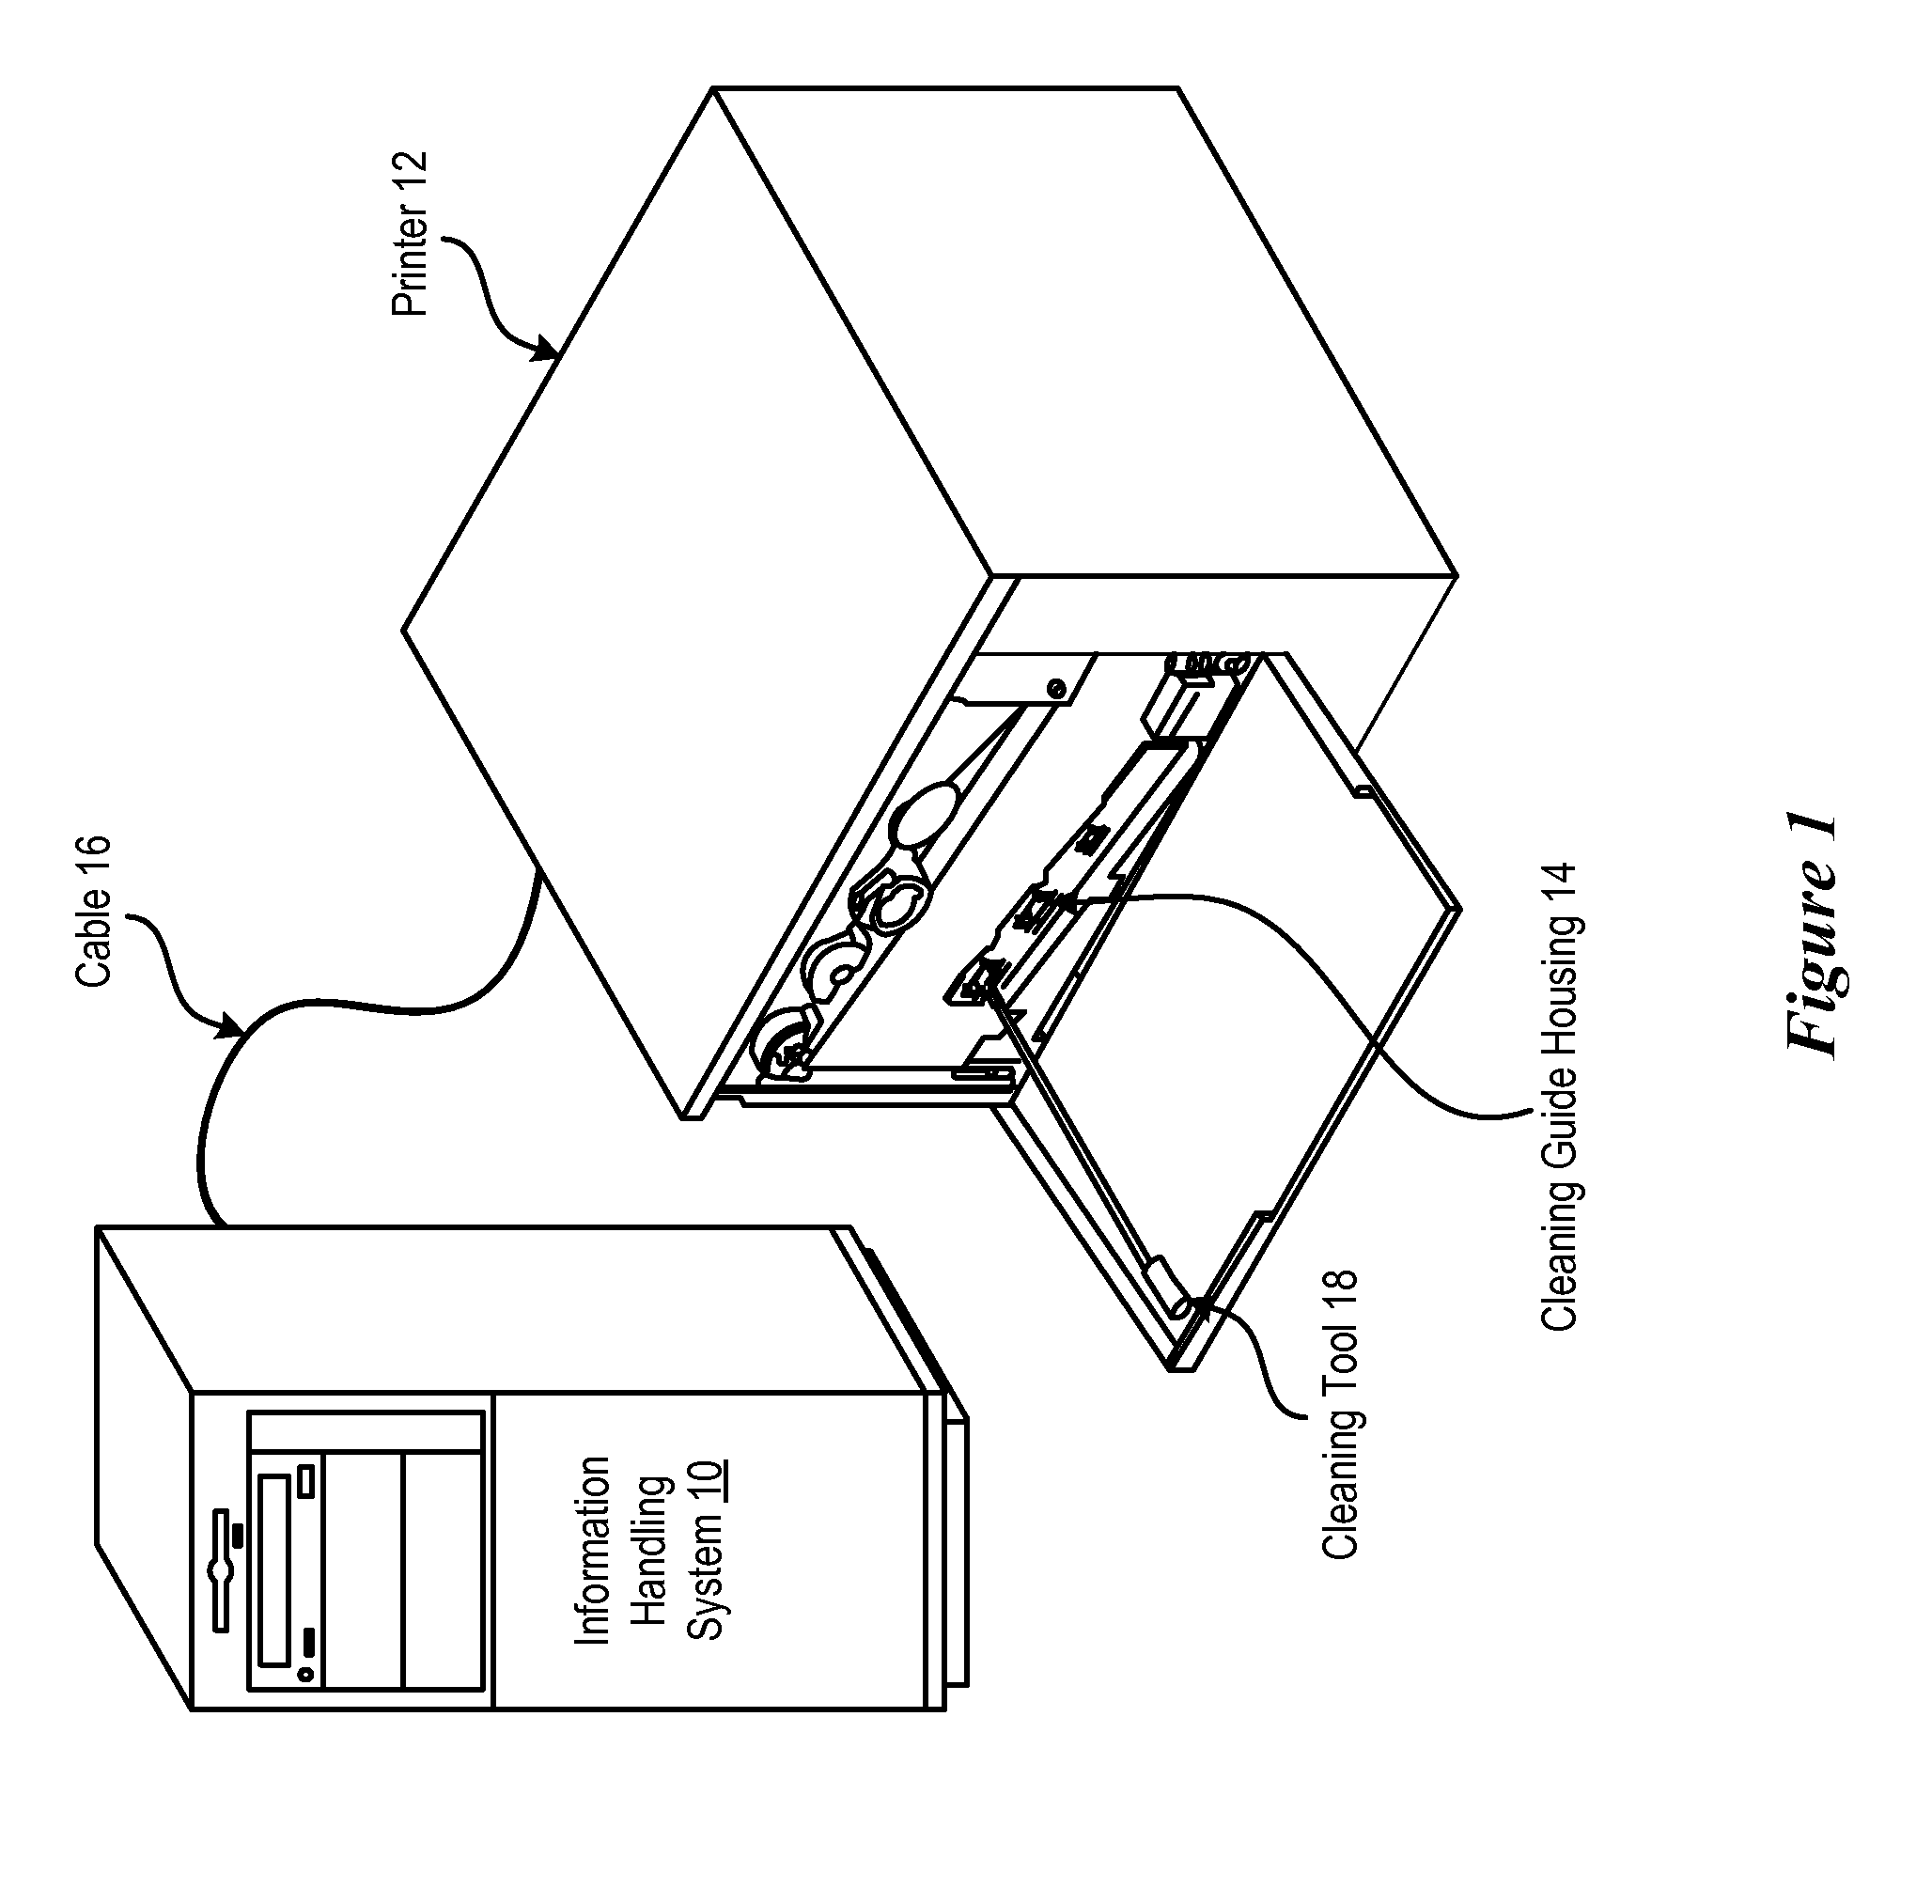 System and Method for Cleaning a Printer